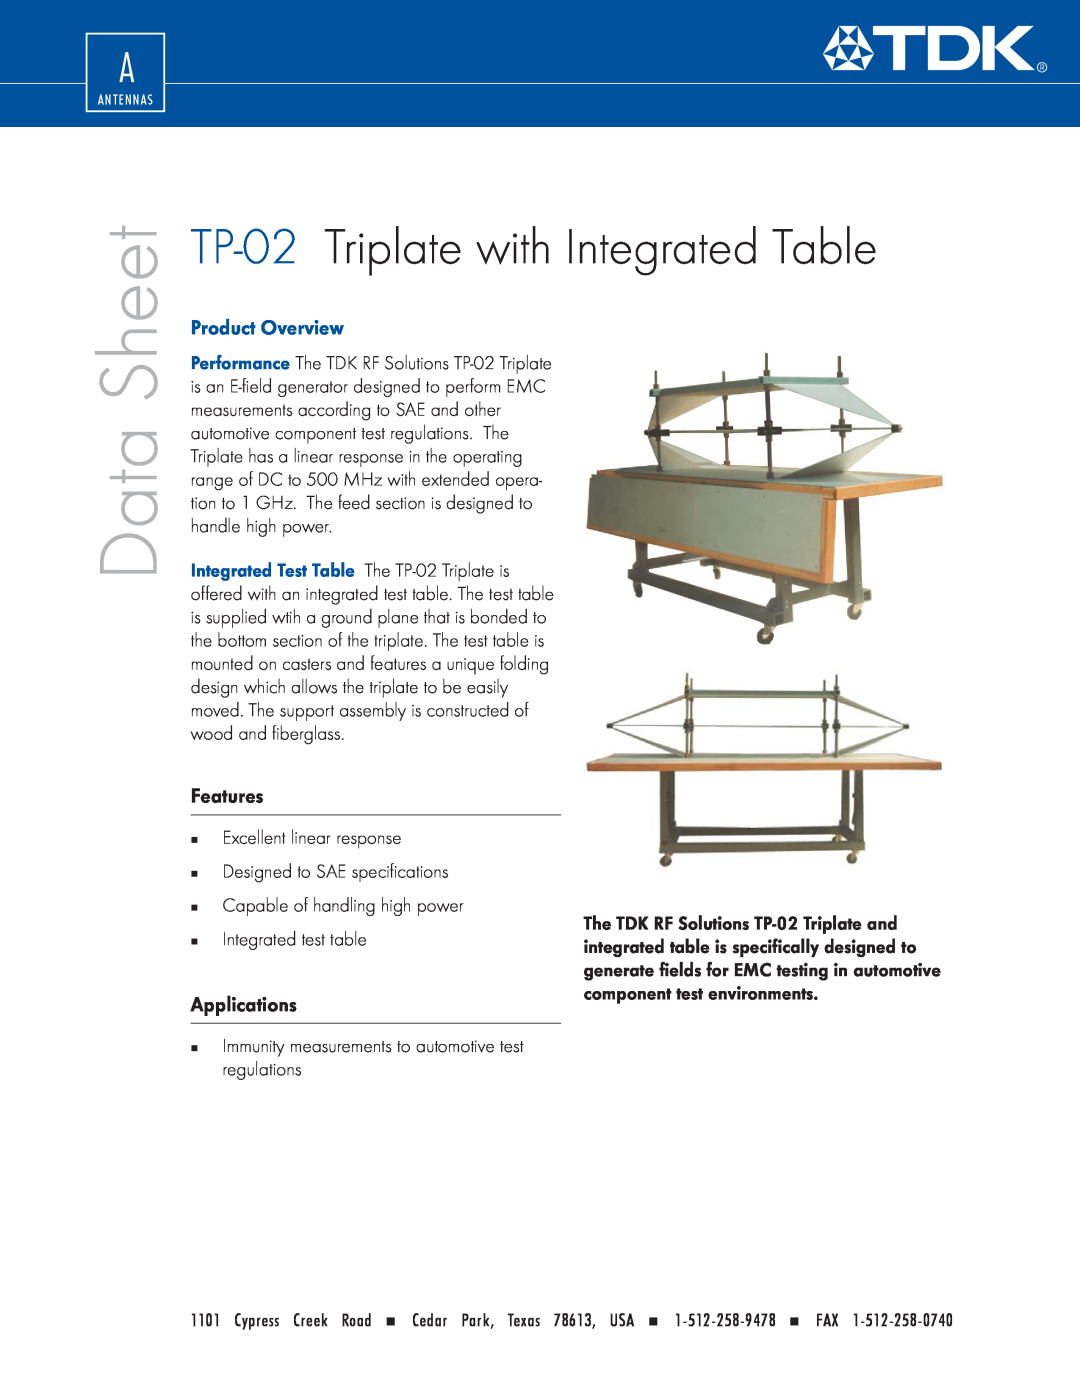 TDK specifications TP-02 Triplate with Integrated Table, Features, Applications, Data, Sheet, Product Overview 